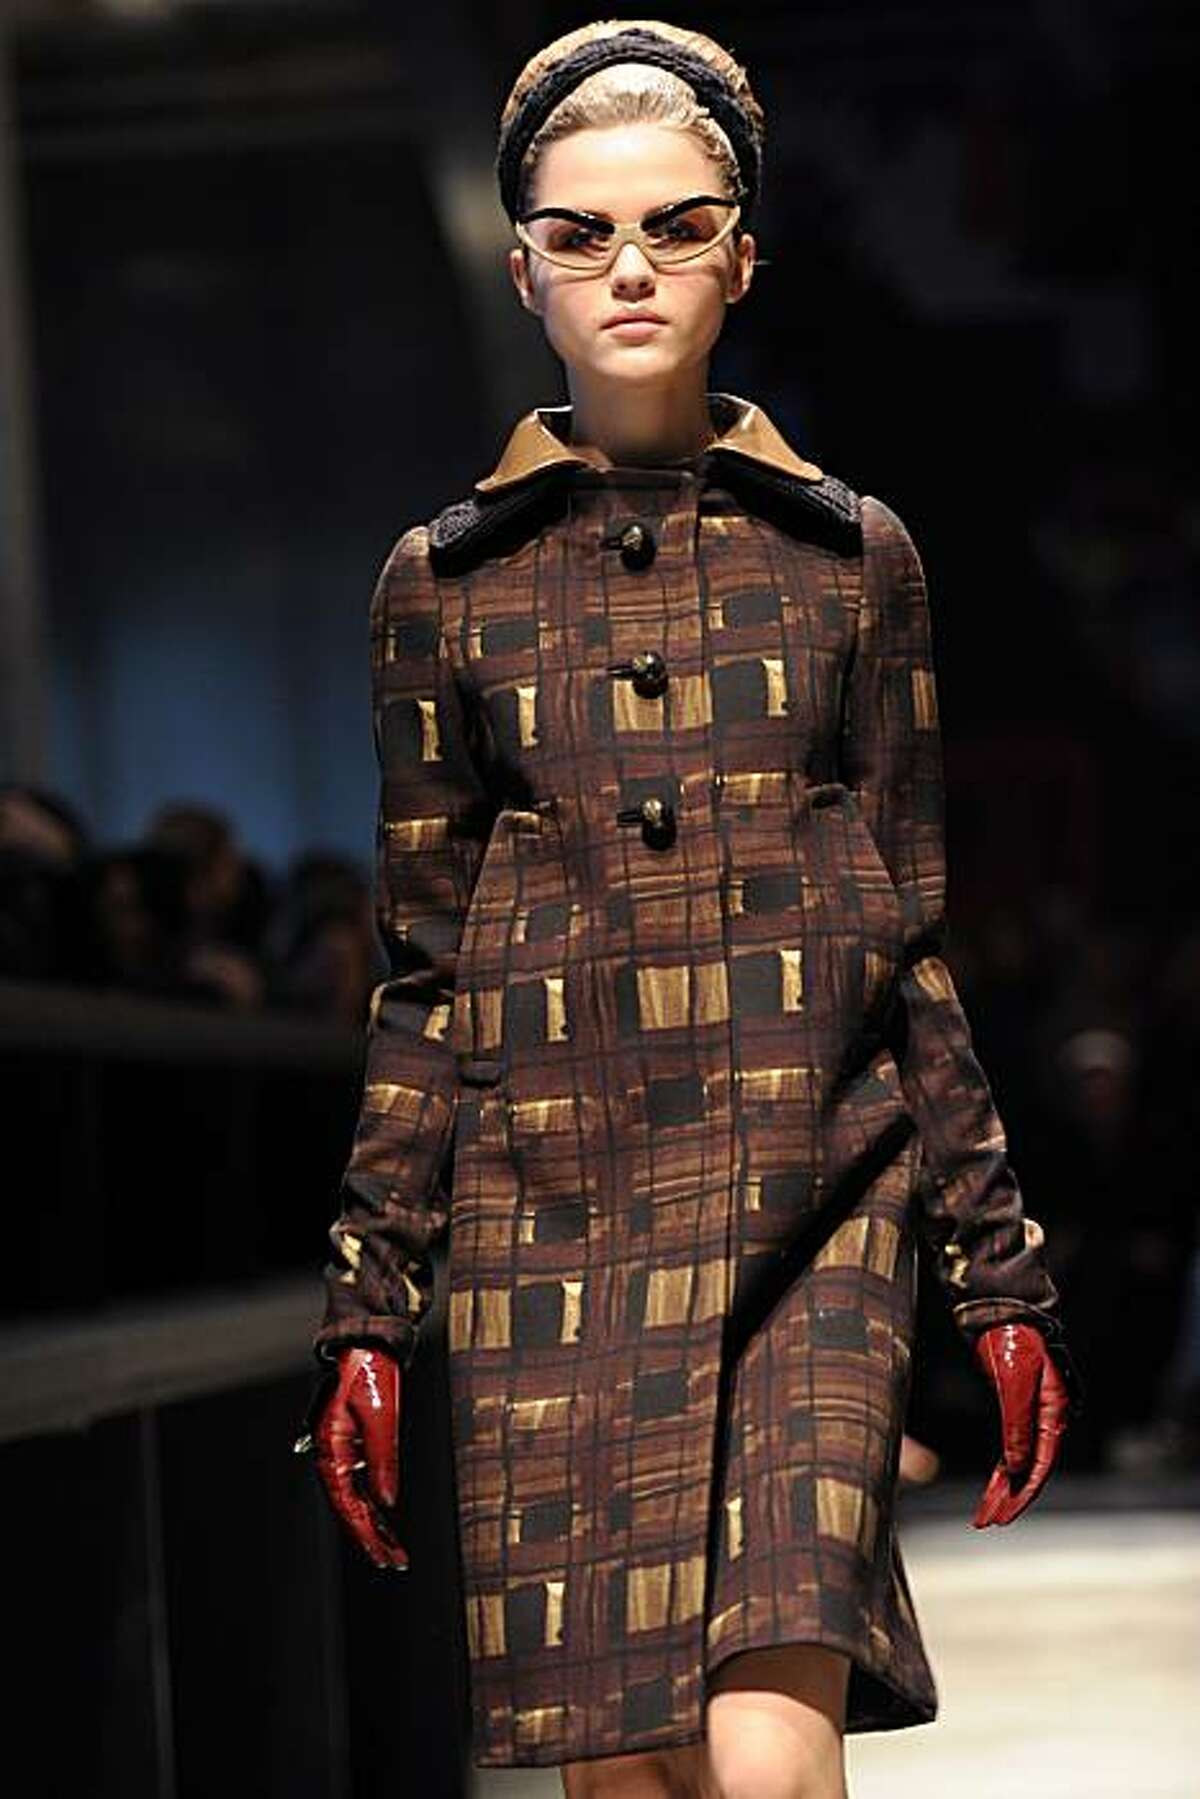 A model displays a creation as part of Prada Fall-Winter 2010-2011 ready-to-wear collection on February 25, 2010 during the Women's fashion week in Milan.